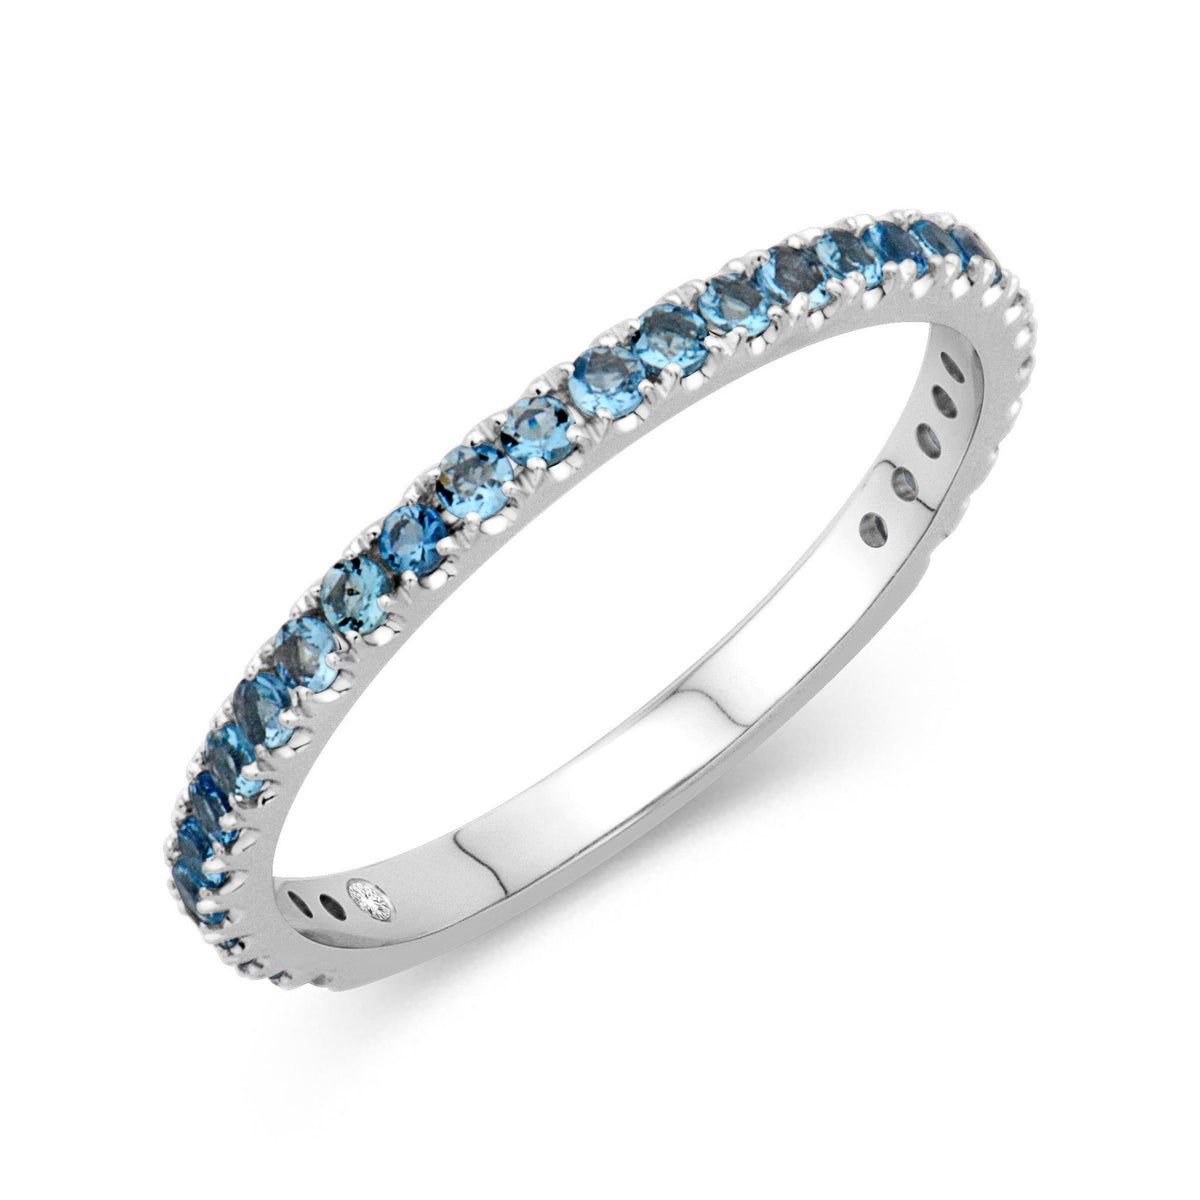 14Kt White Gold Stackable Gemstone Ring With Blue Topaz